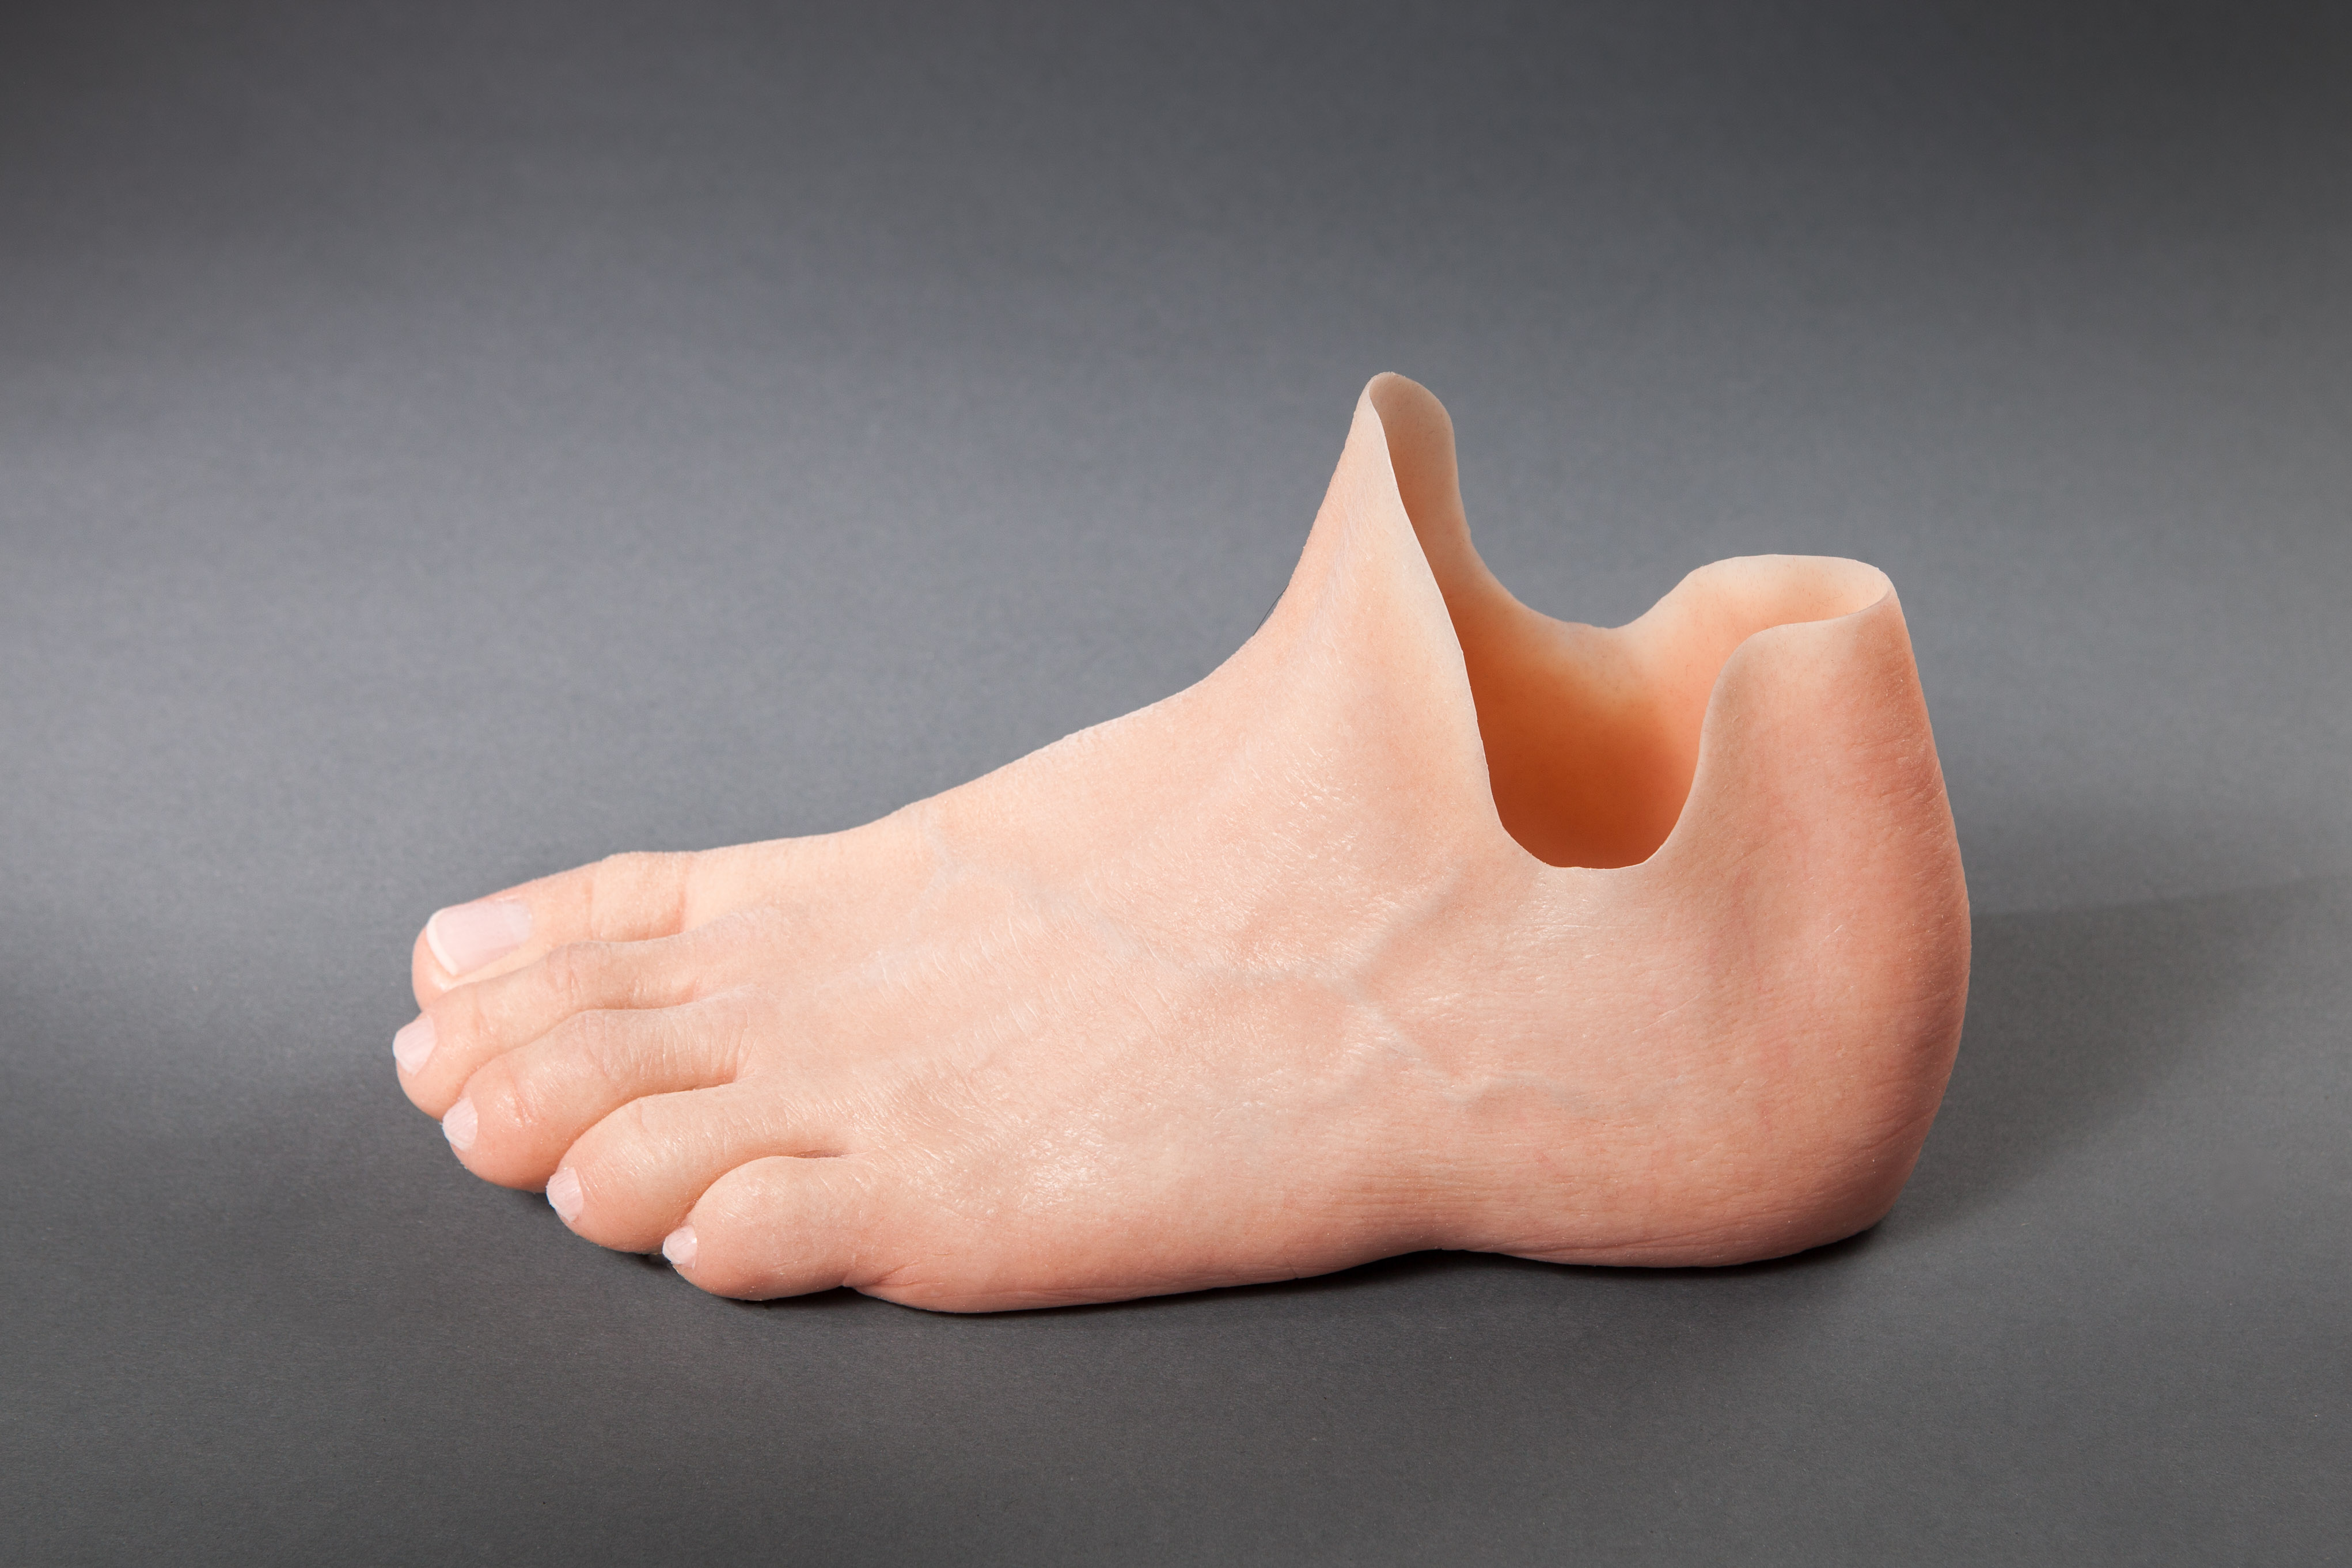 Foot prosthetics 3D printed by a German startup. Source: 3printr